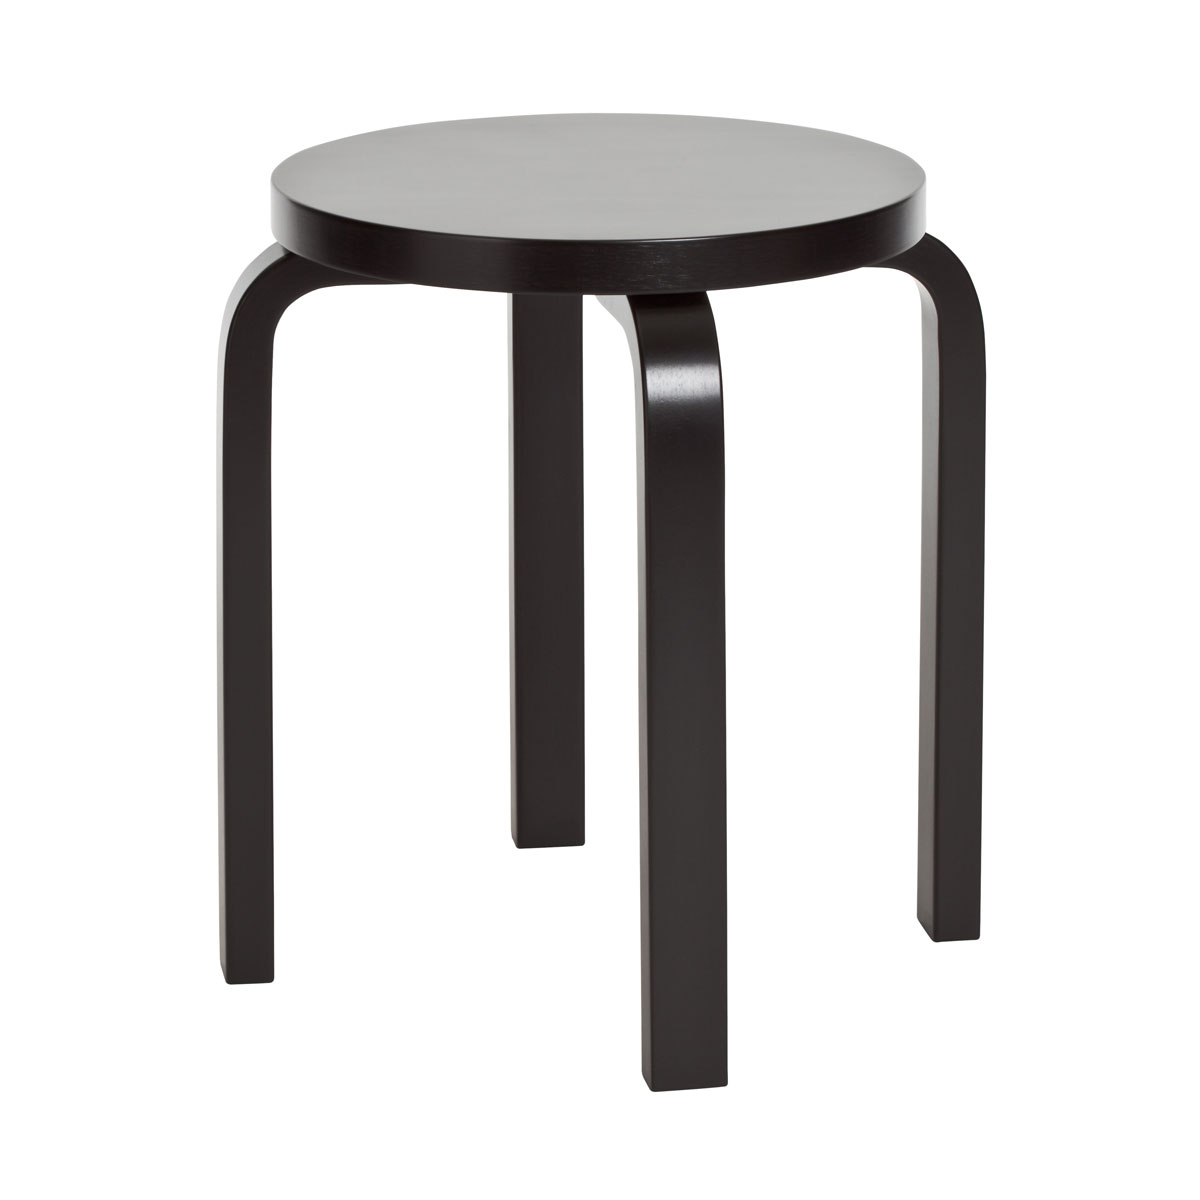 artek alvar aalto four legged stools black lacquered lacquer accent table truck tool box west elm desk lamp seaside themed lighting pottery barn living room chairs cool end ideas